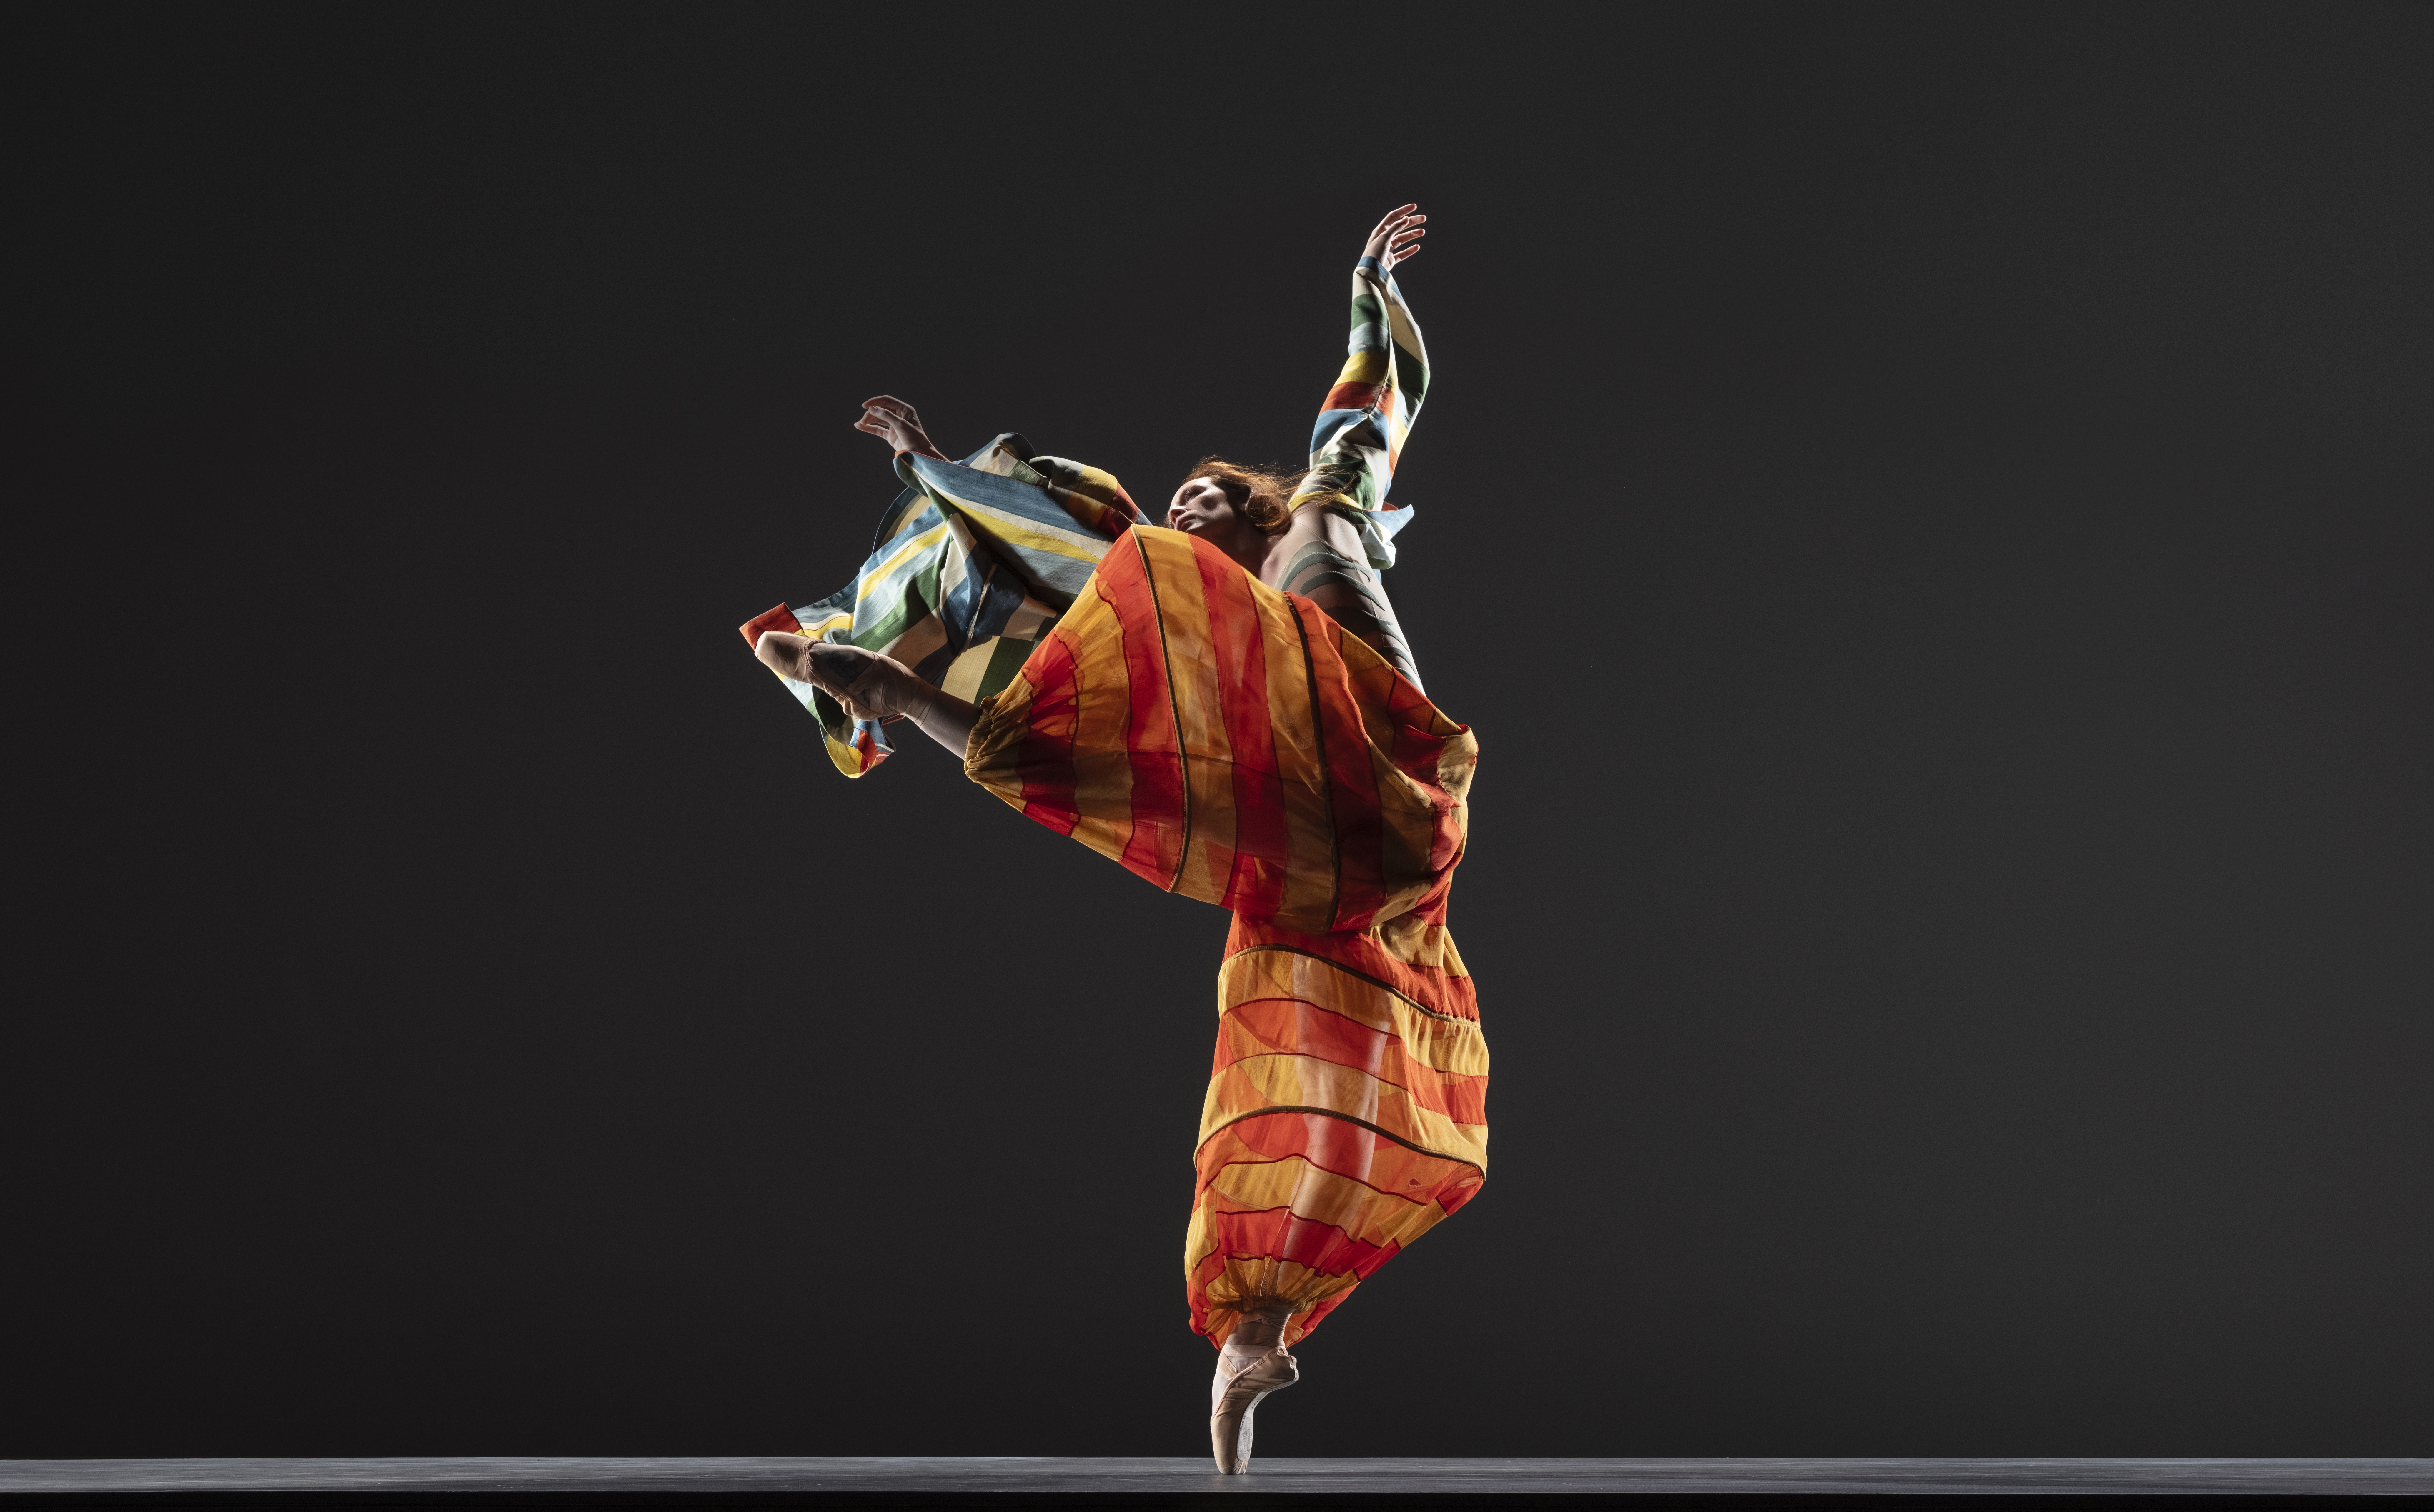 LINES Ballet company dancer Madeline DeVries dancing en pointe wearing red and yellow striped flowy pants and a red and blue striped flowy shirt; one leg is extended out, as the arms extend